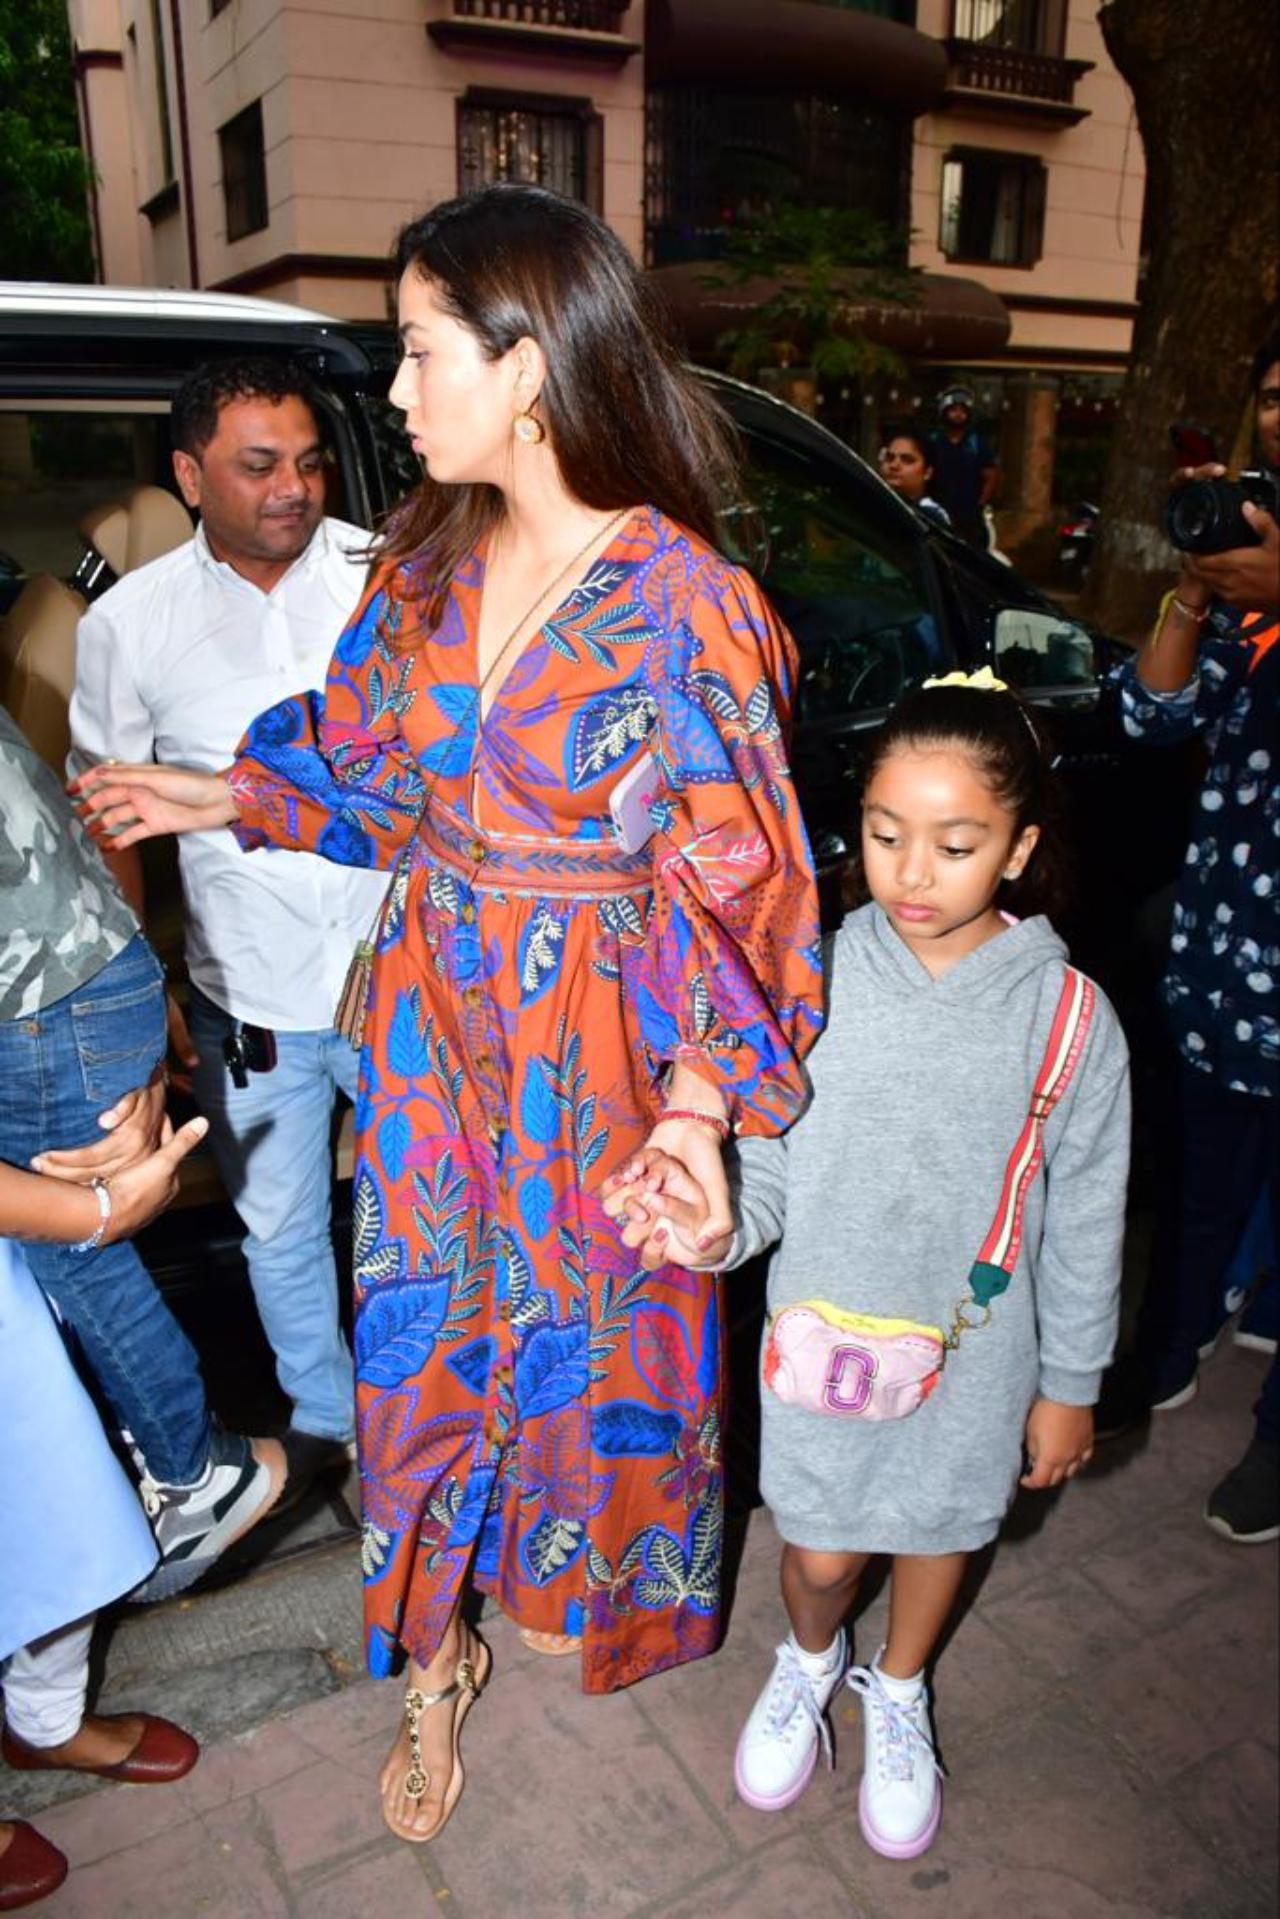 Shahid Kapoor's wife Mira Rajput looked like a breath of fresh air as she attended the birthday party with her daughter Misha